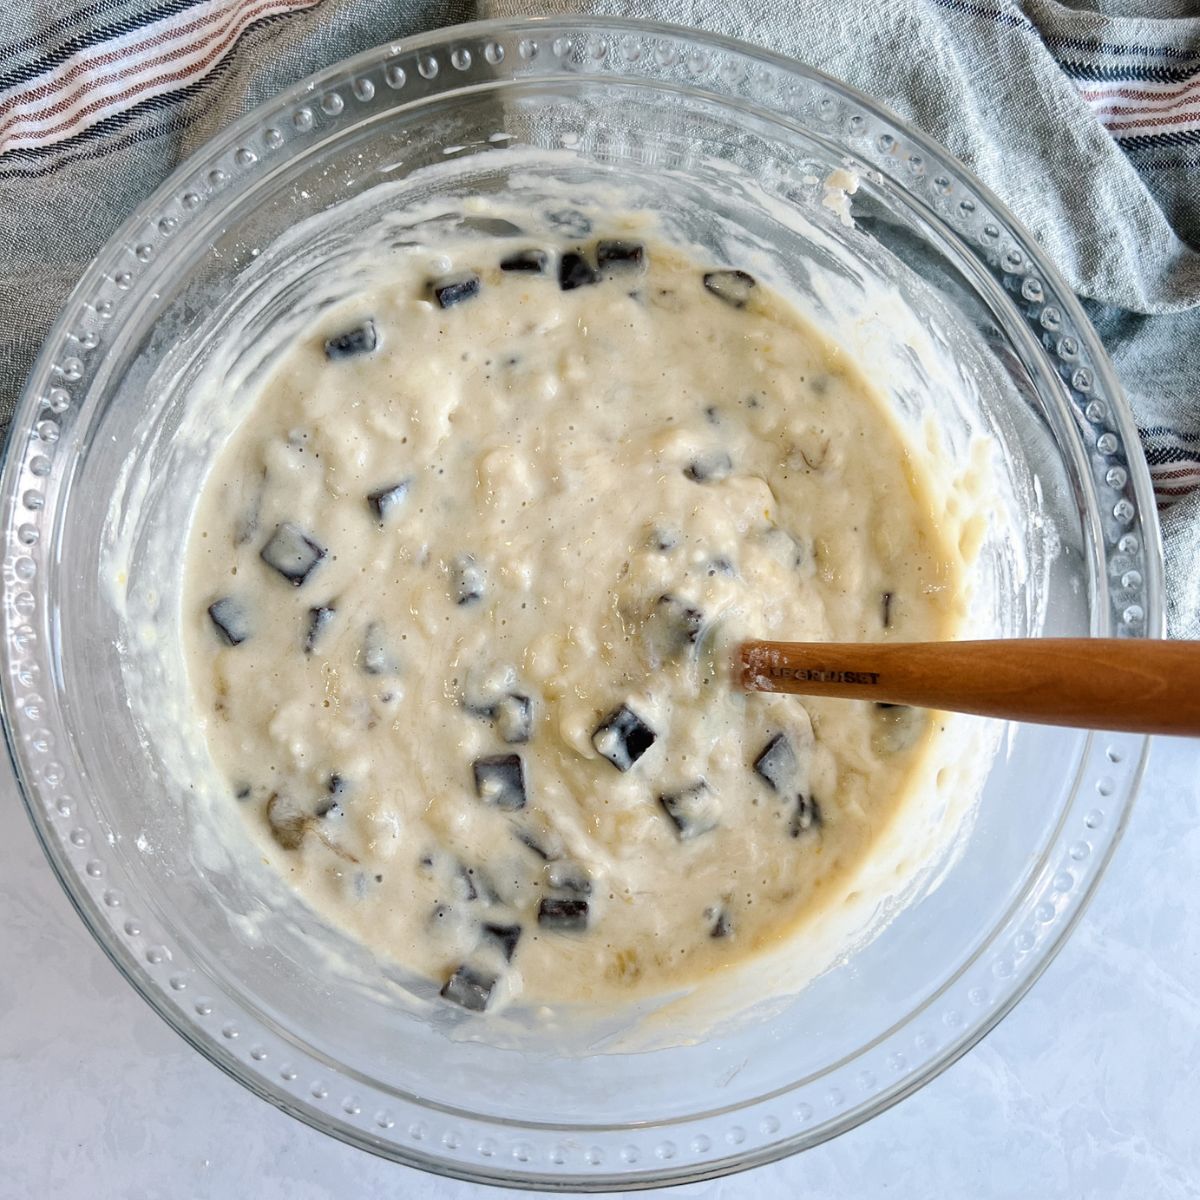 Chocolate chunk banana bread batter with chocolate chunks added to the batter.